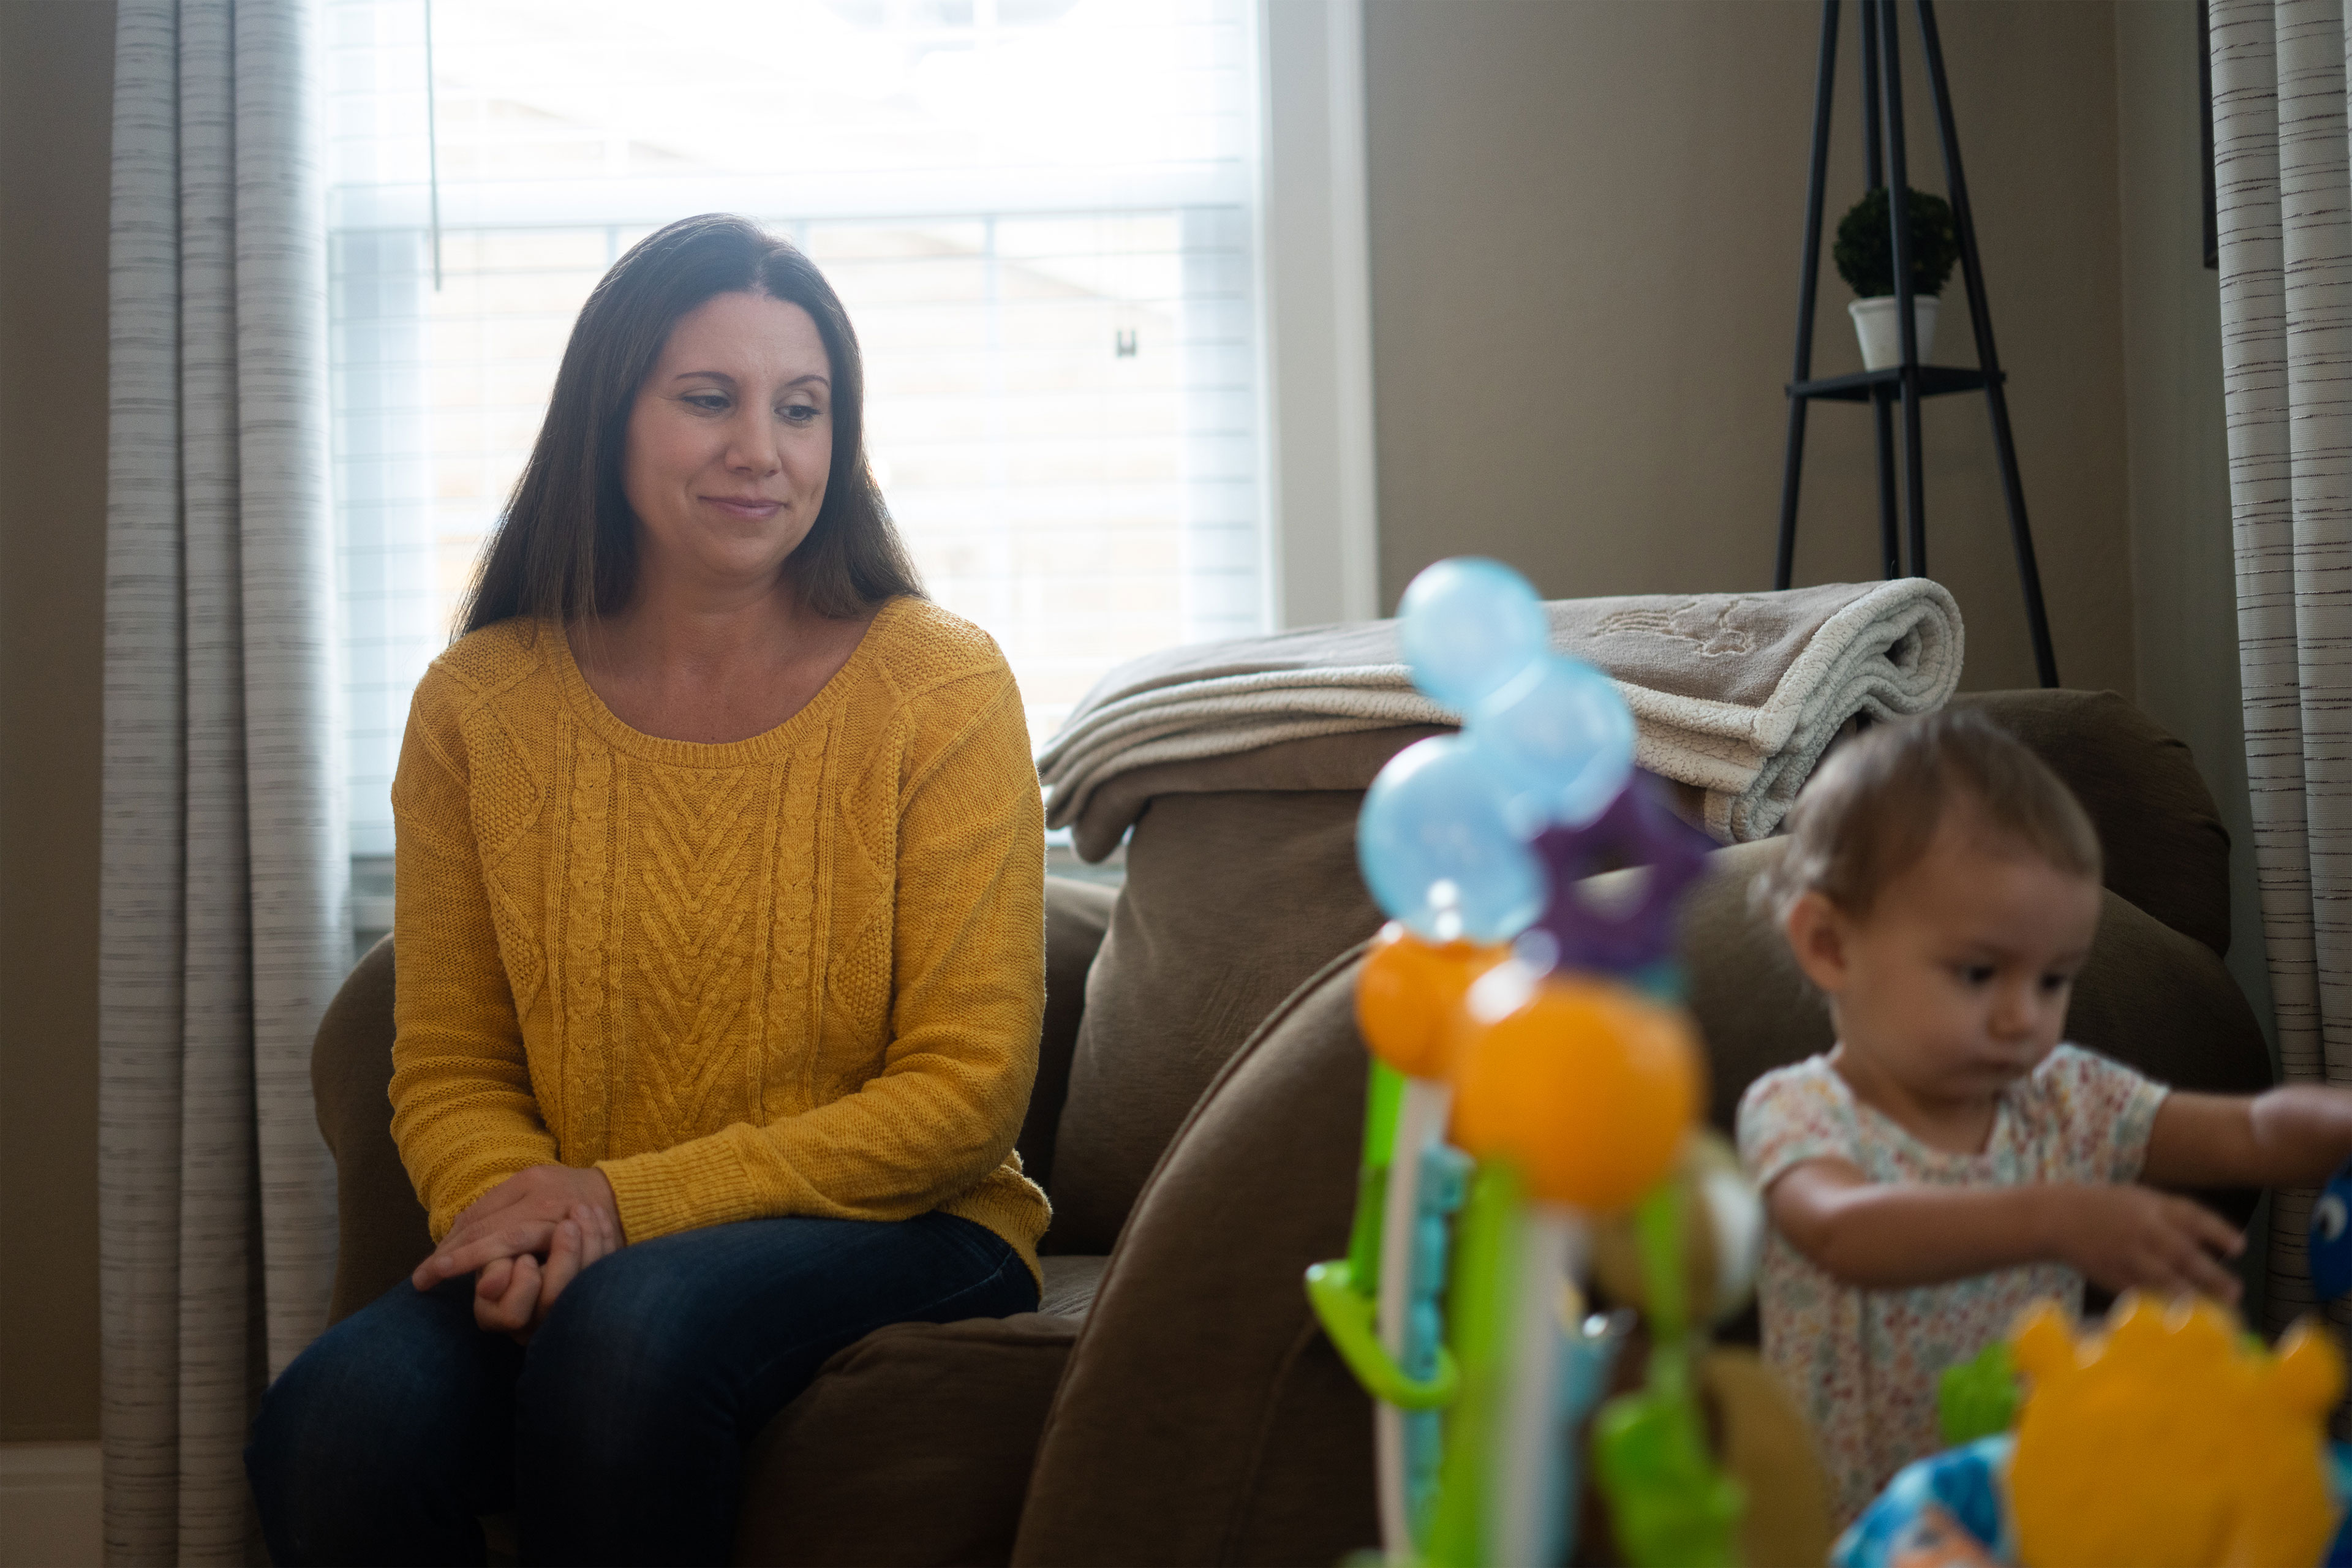 A mother with dark brown hair and a yellow sweater sits on a couch and watches her young daughter, about one year old, play with a toy.